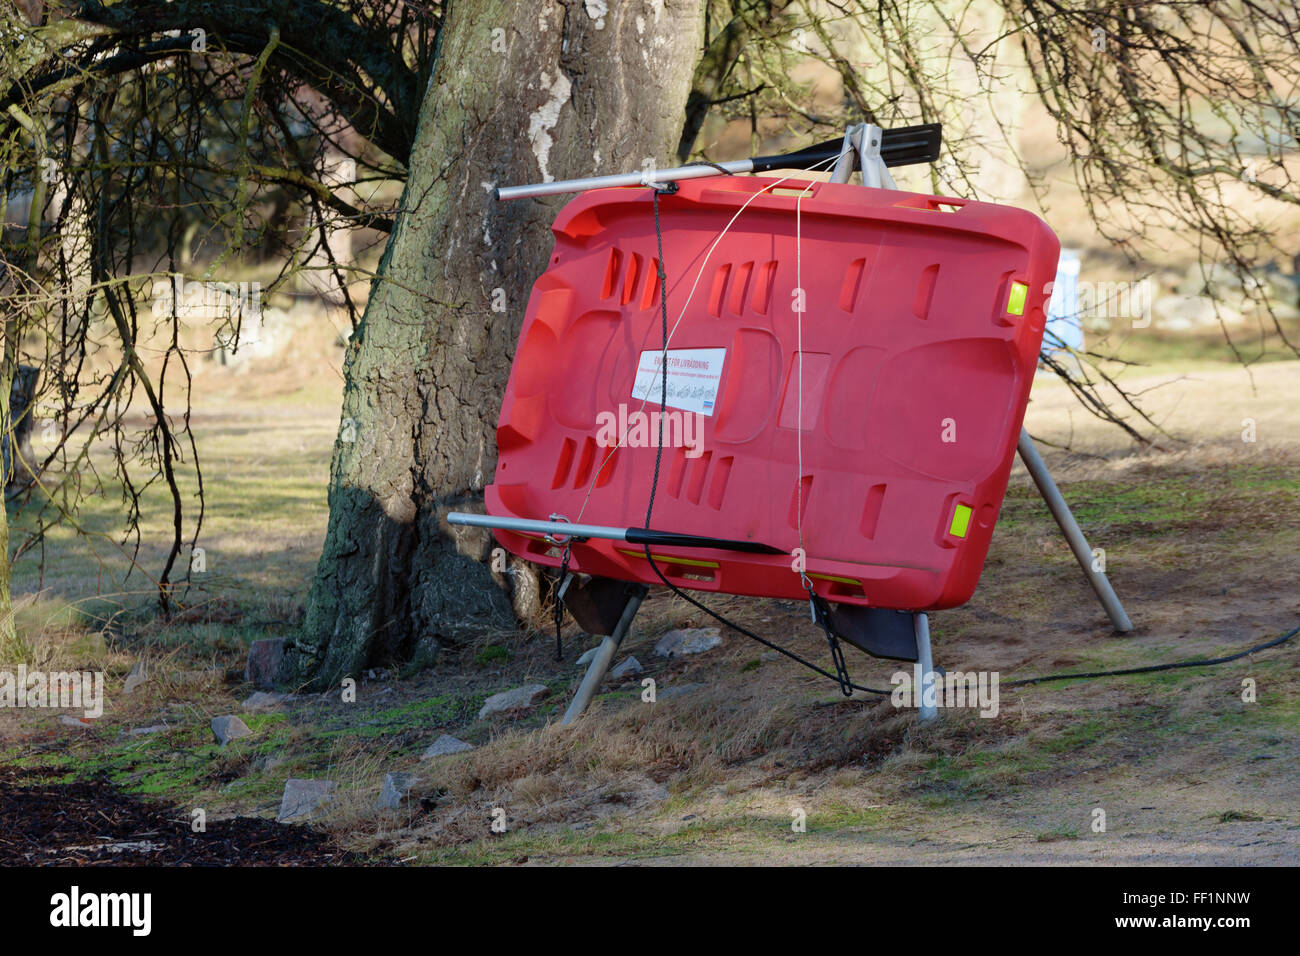 Karlshamn, Sweden - February 04, 2016: A red plastic lifeboat under a tree on a stand. This lifesaver is located at a public bat Stock Photo